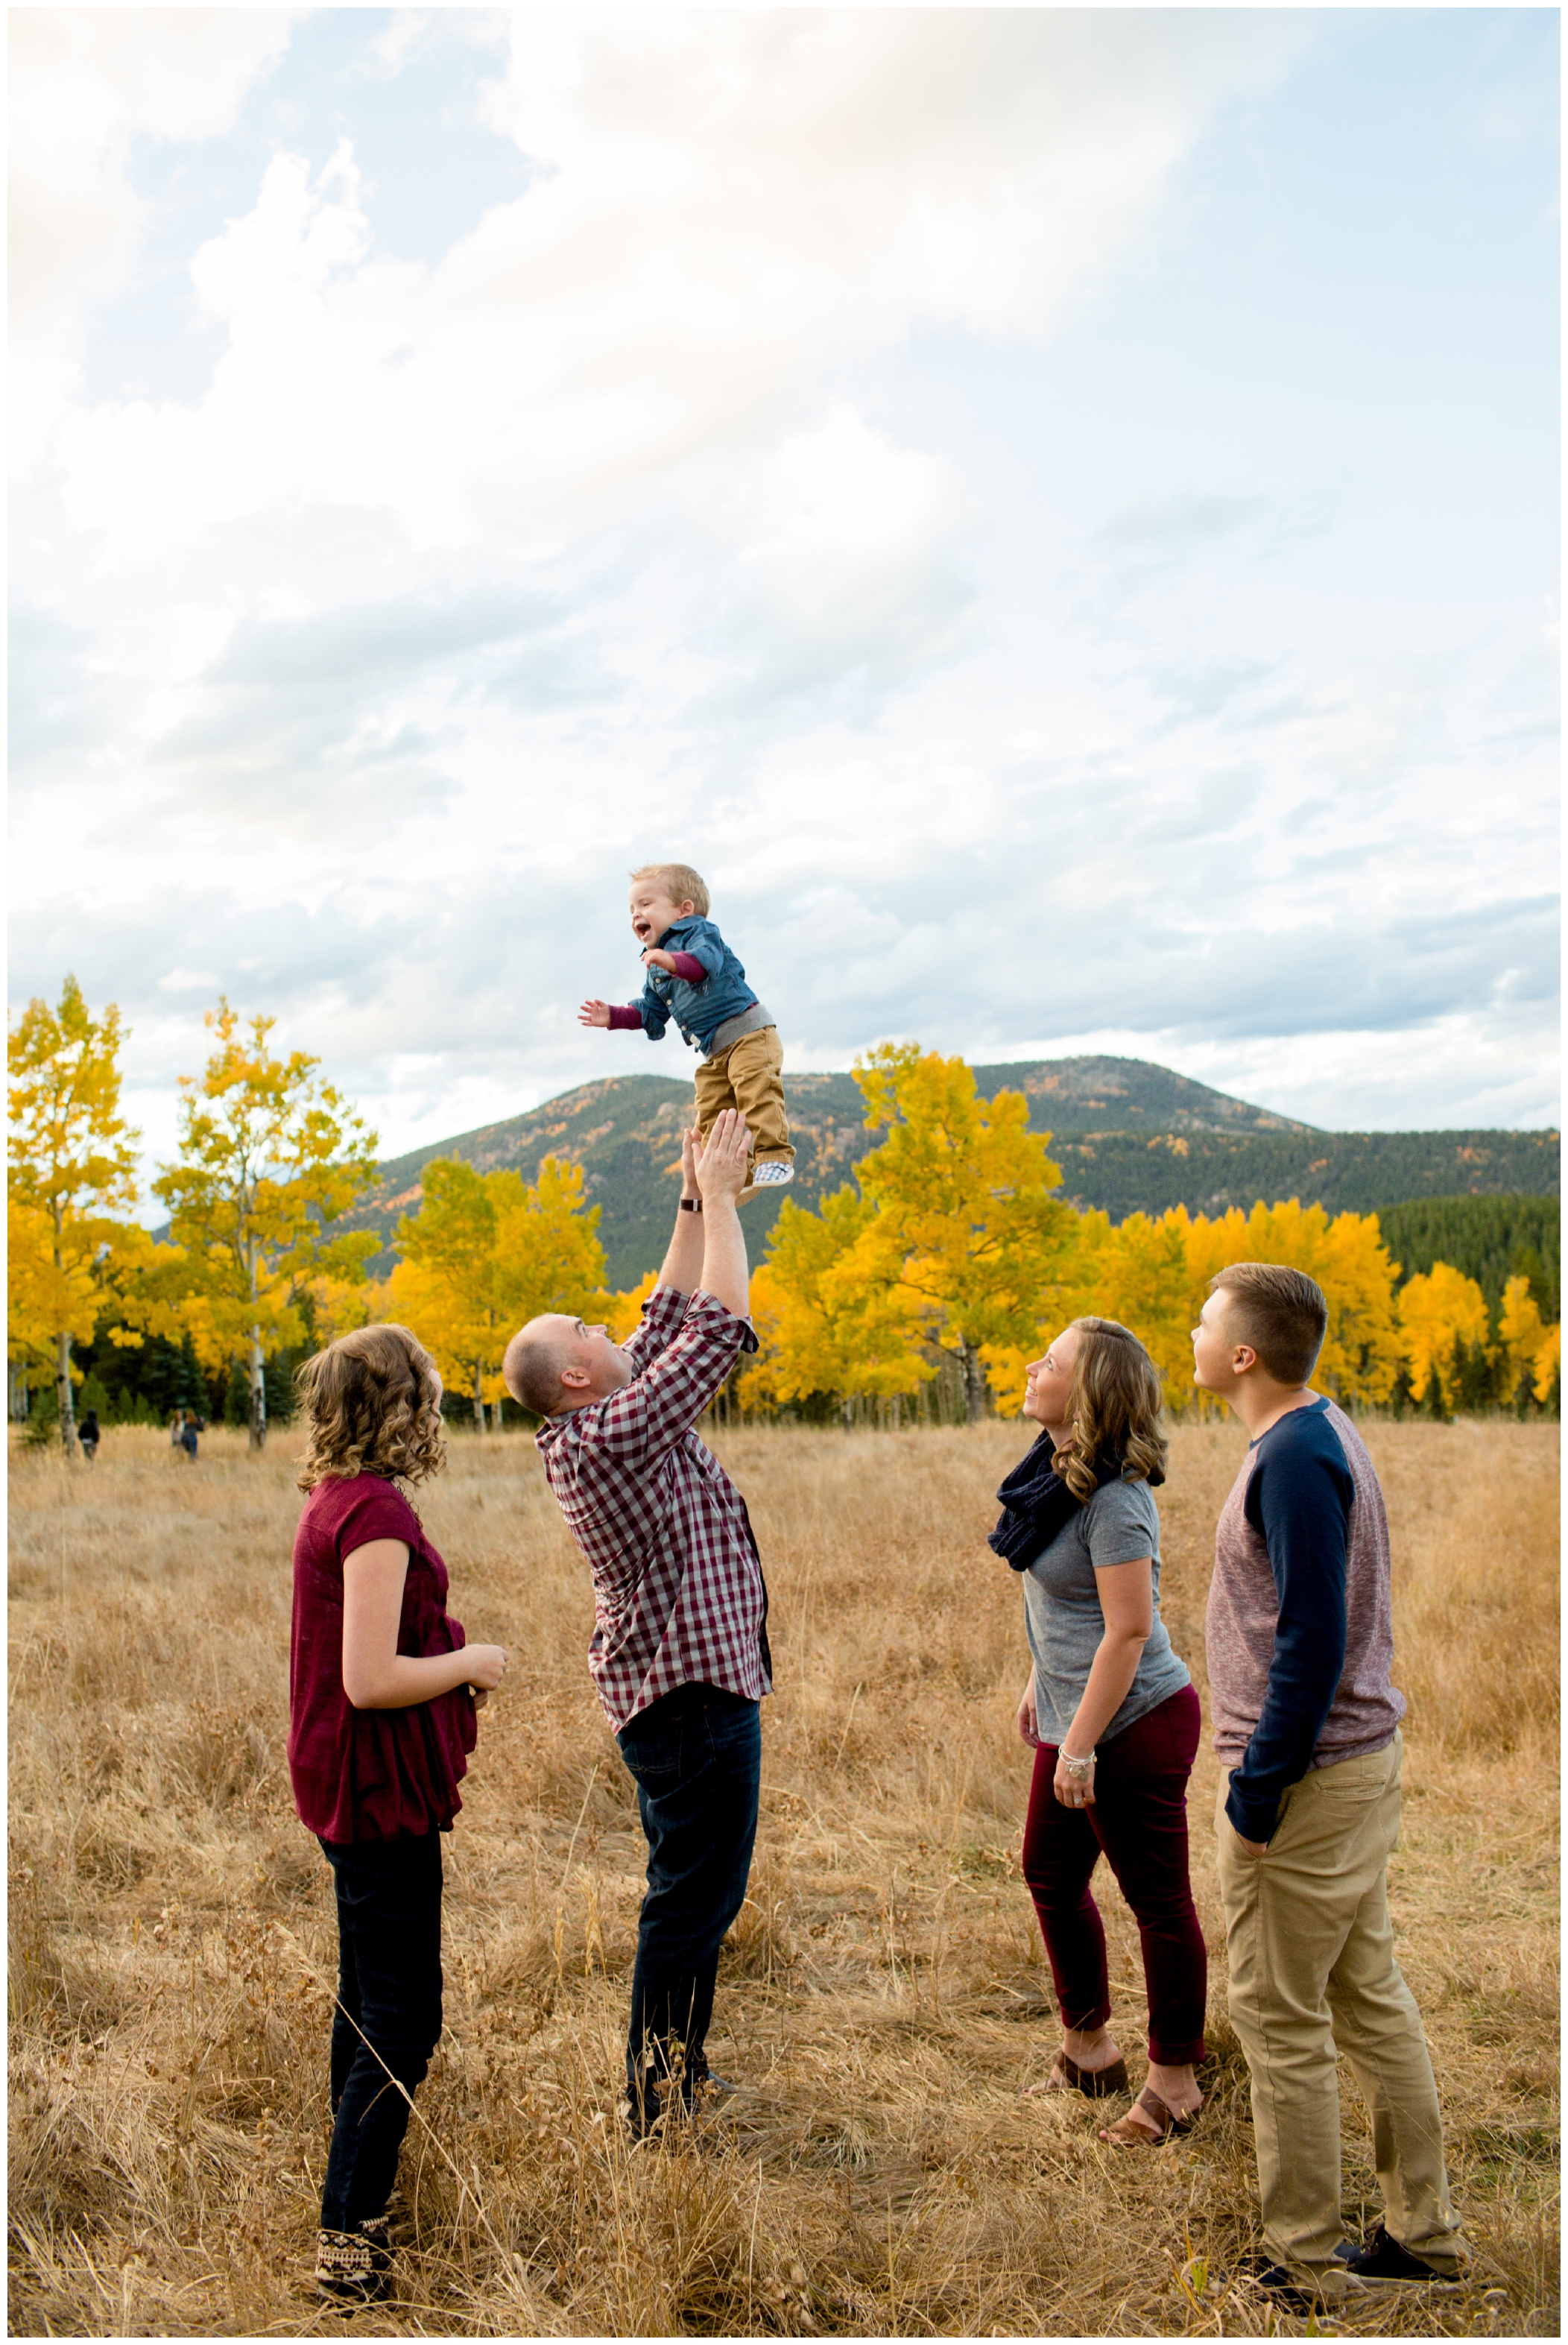 Evergreen Colorado family photos at Frosberg Park by Plum Pretty Photography